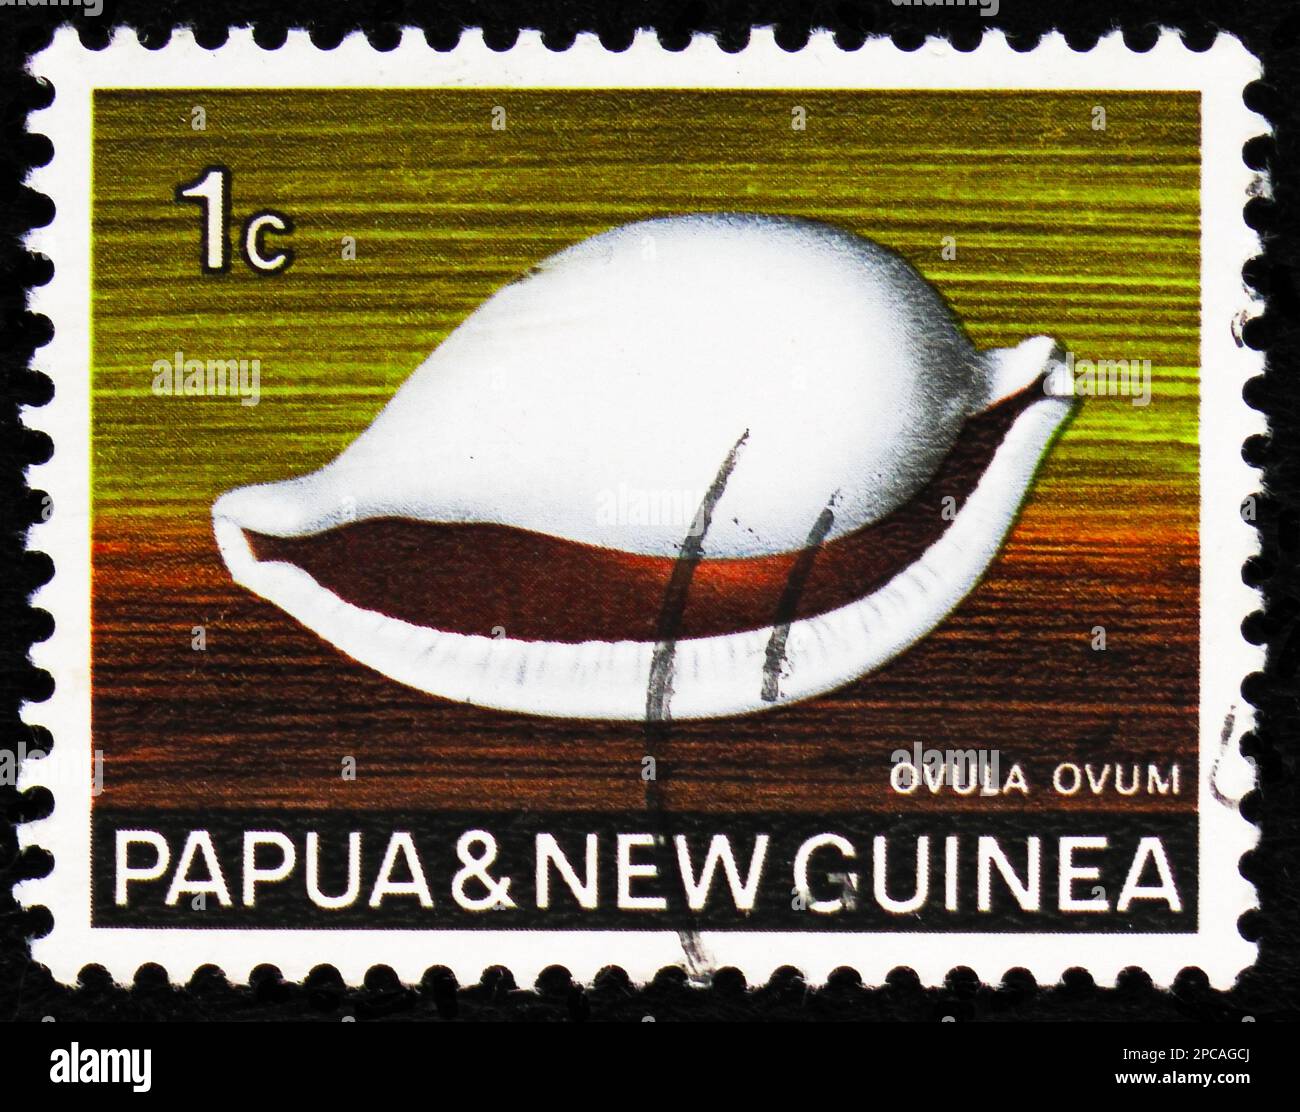 MOSCOW, RUSSIA - FEBRUARY 15, 2023: Postage stamp printed in Papua New Guinea shows Common Egg Cowry (Ovula ovum), Seashells Definitives serie, circa Stock Photo